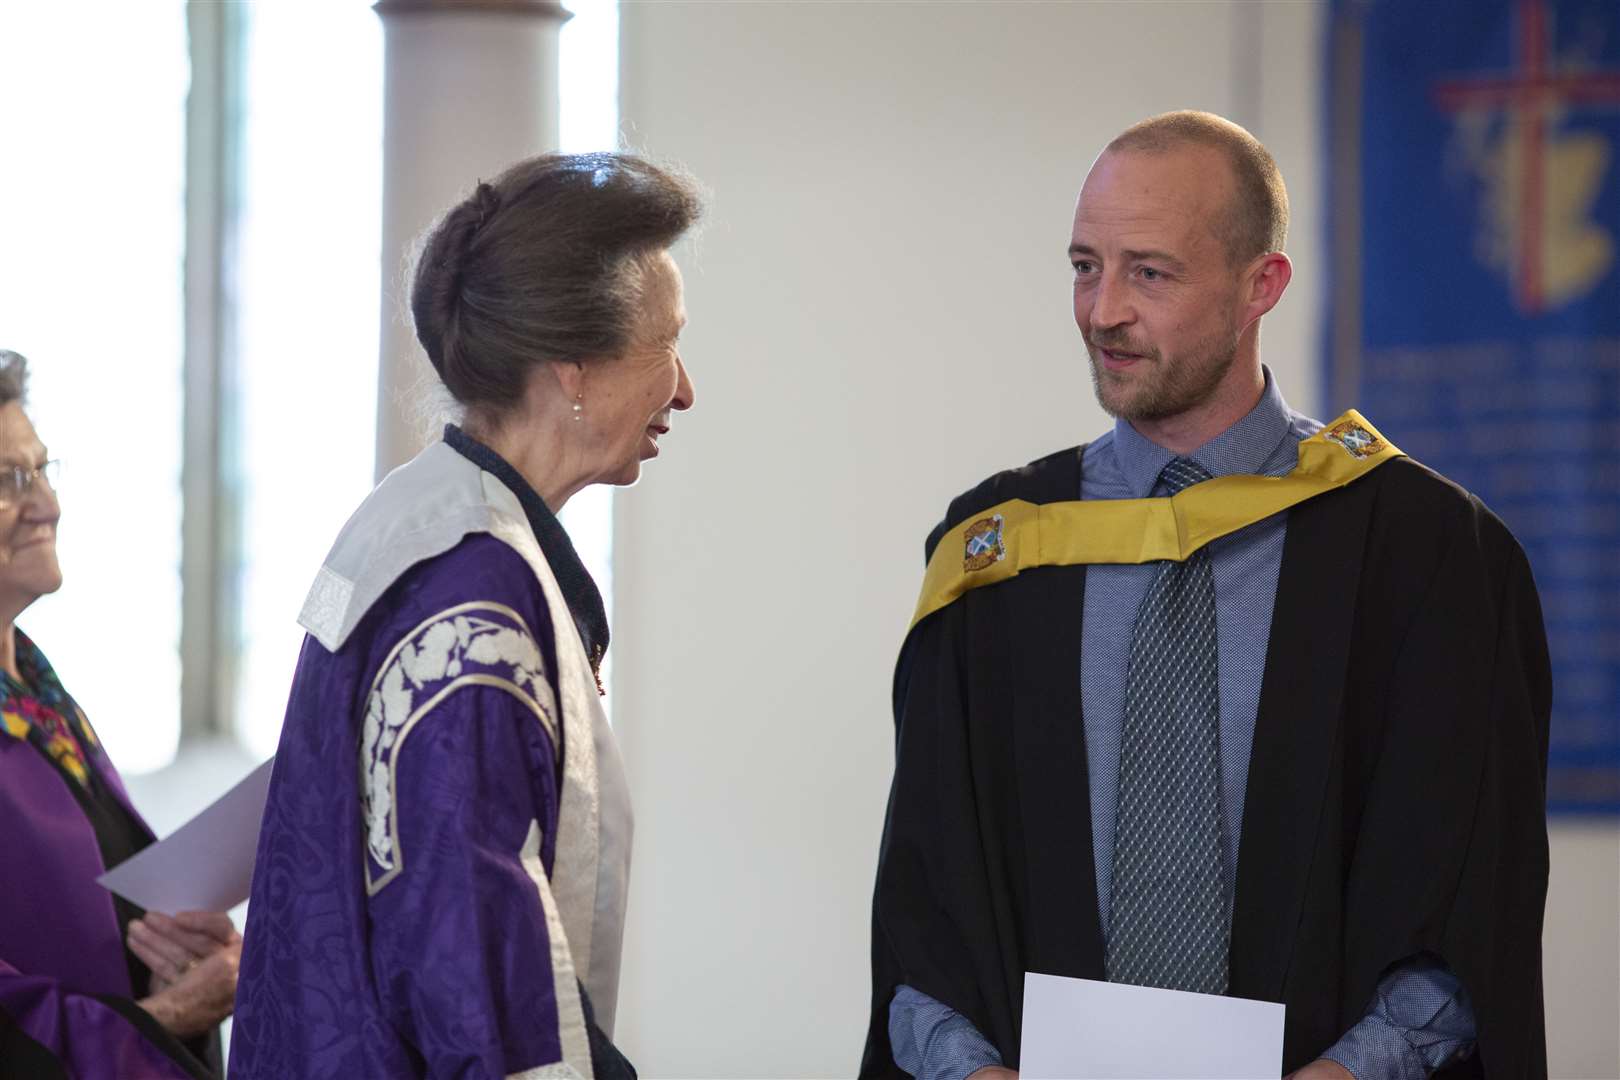 Jon O'Connor, who was the UHI North Highland Student of the Year, speaks to Princess Anne.